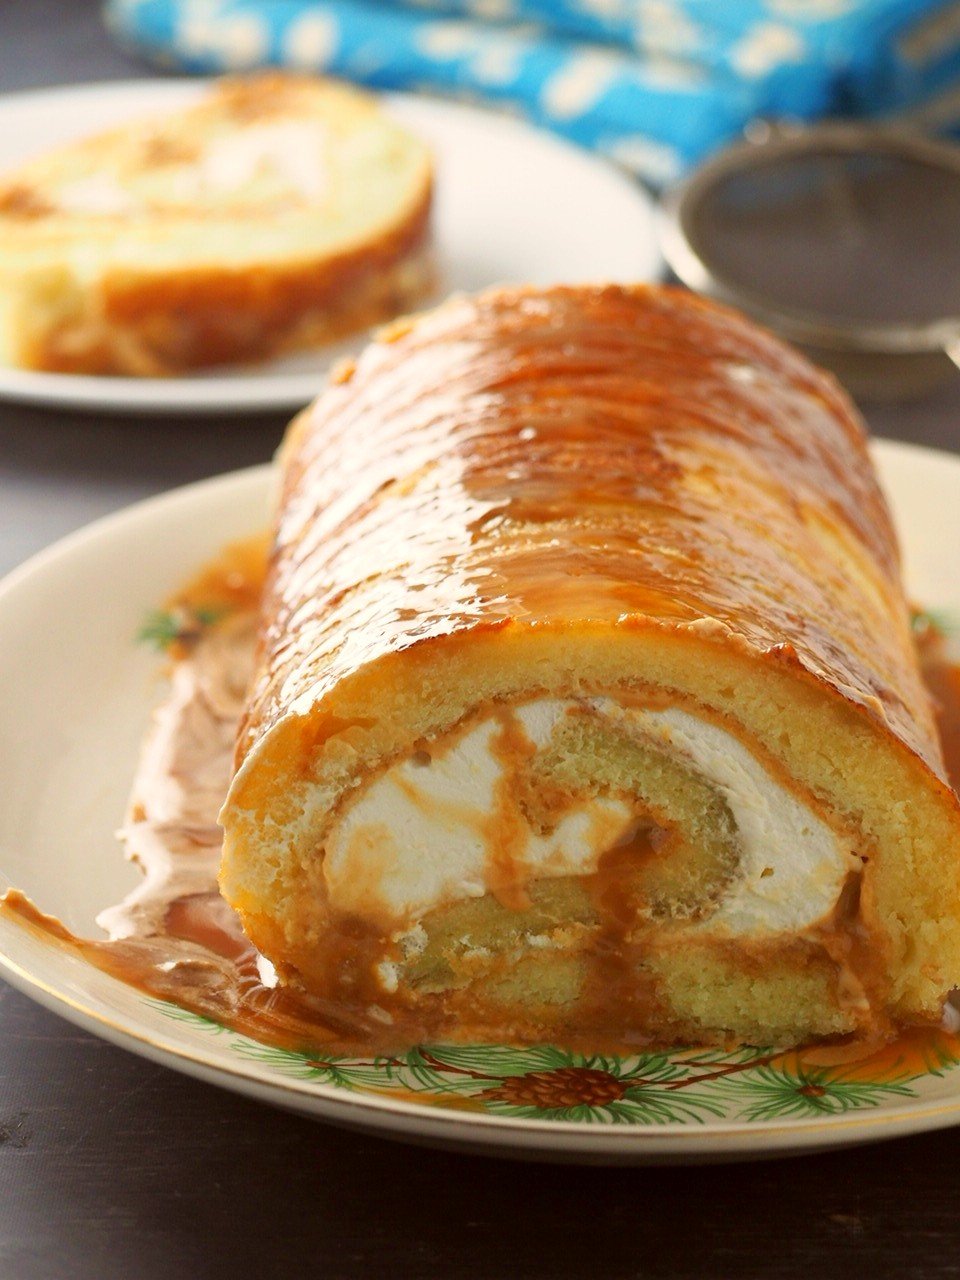 dulce de leche cake roll photo with one slice at the background.